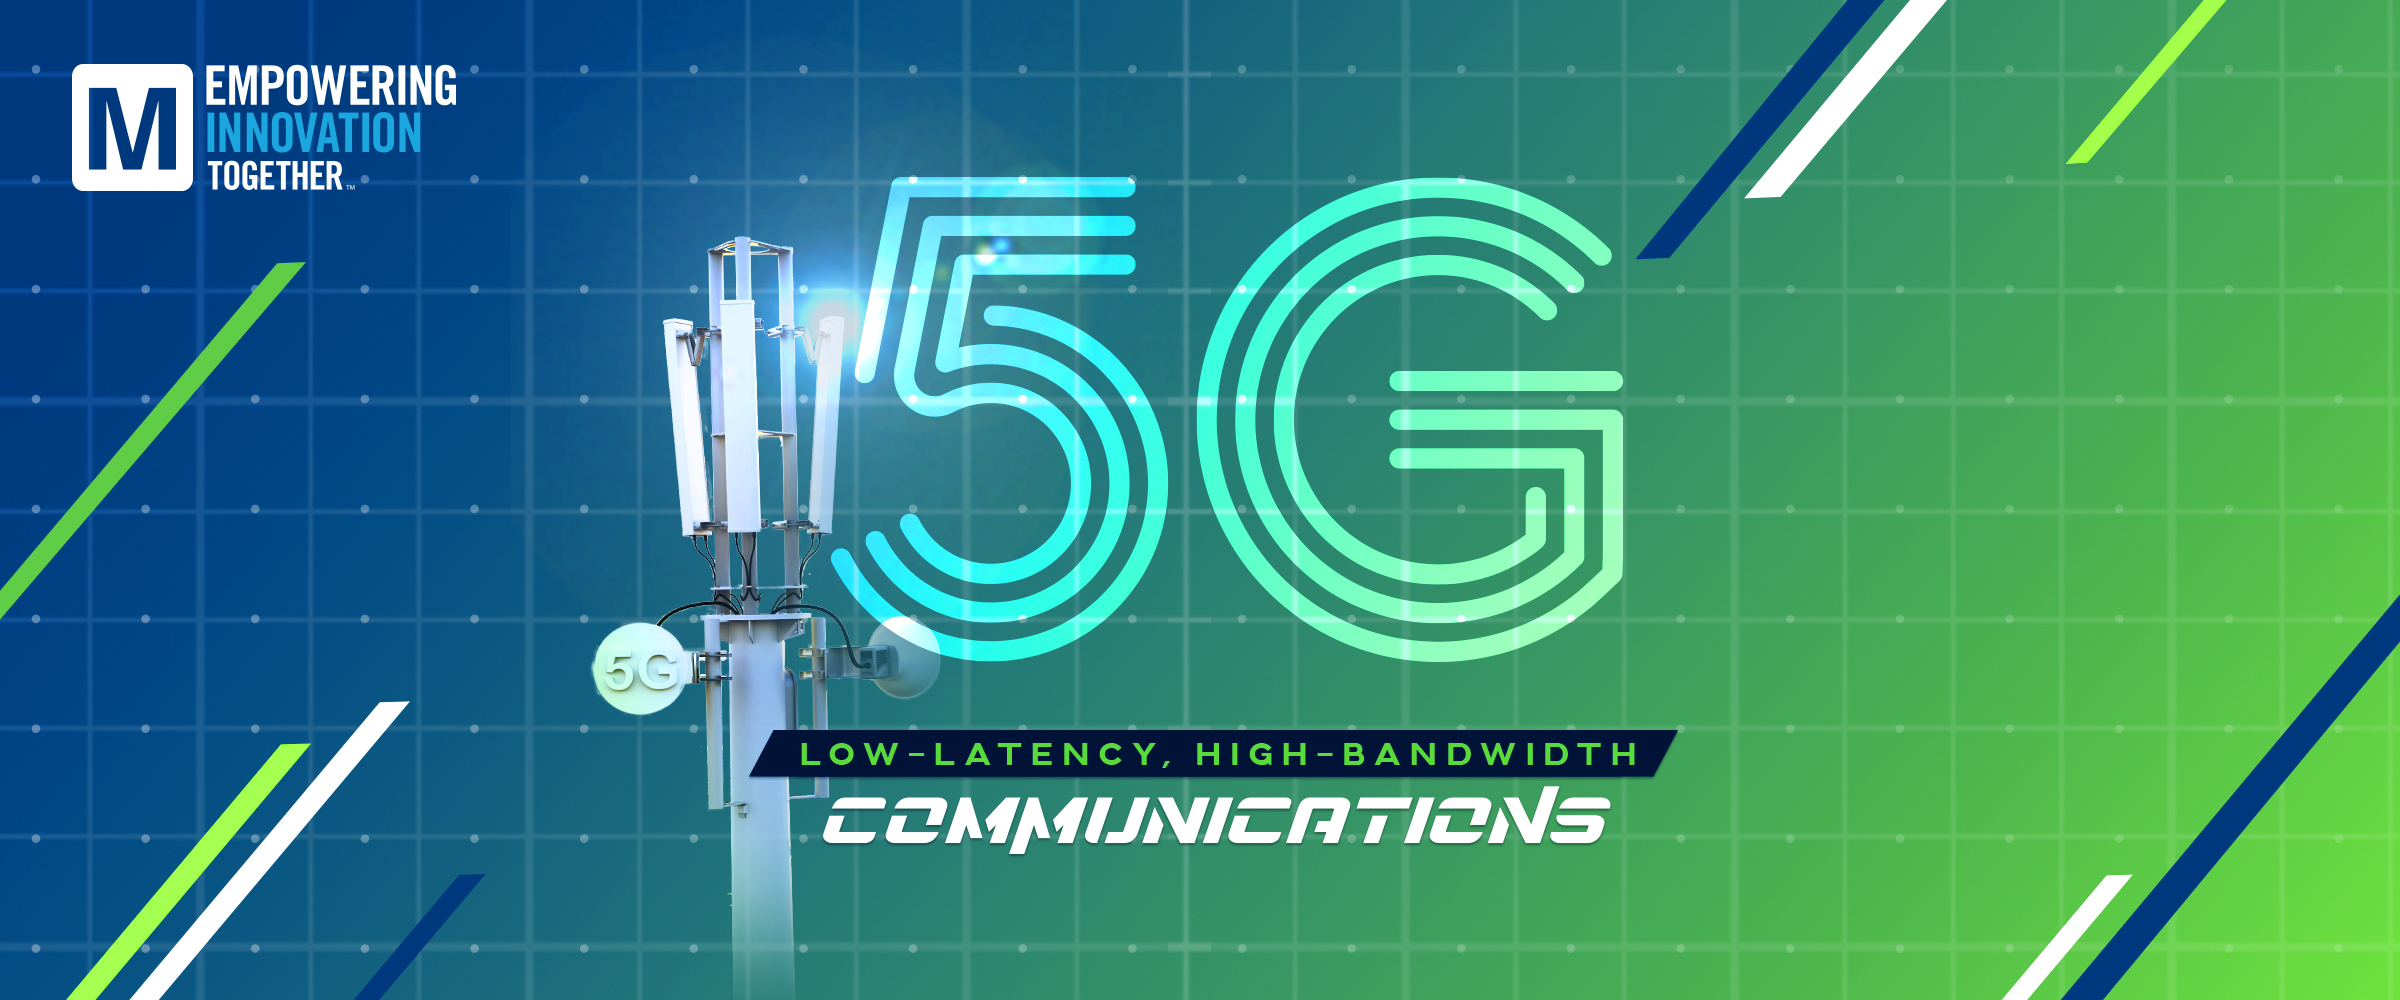 Mouser Electronics Unveils '2021 Empowering Innovation Together' Program with Debut Podcast on 5G Tech